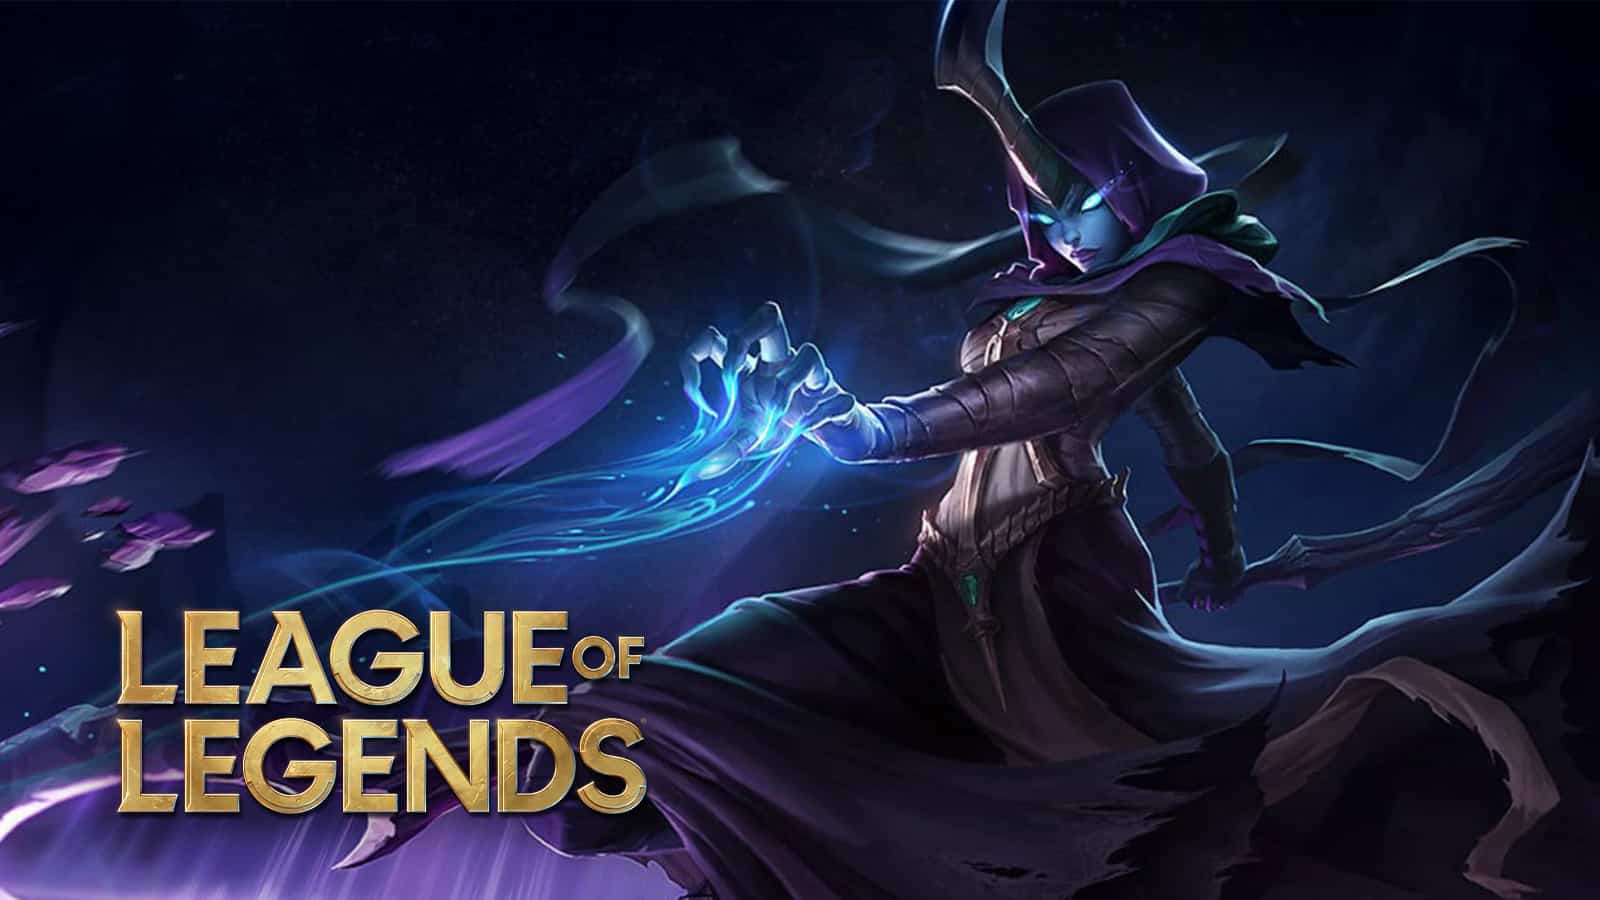 Soraka LoL patch 11.19 nerfs after becoming League's most broken champion